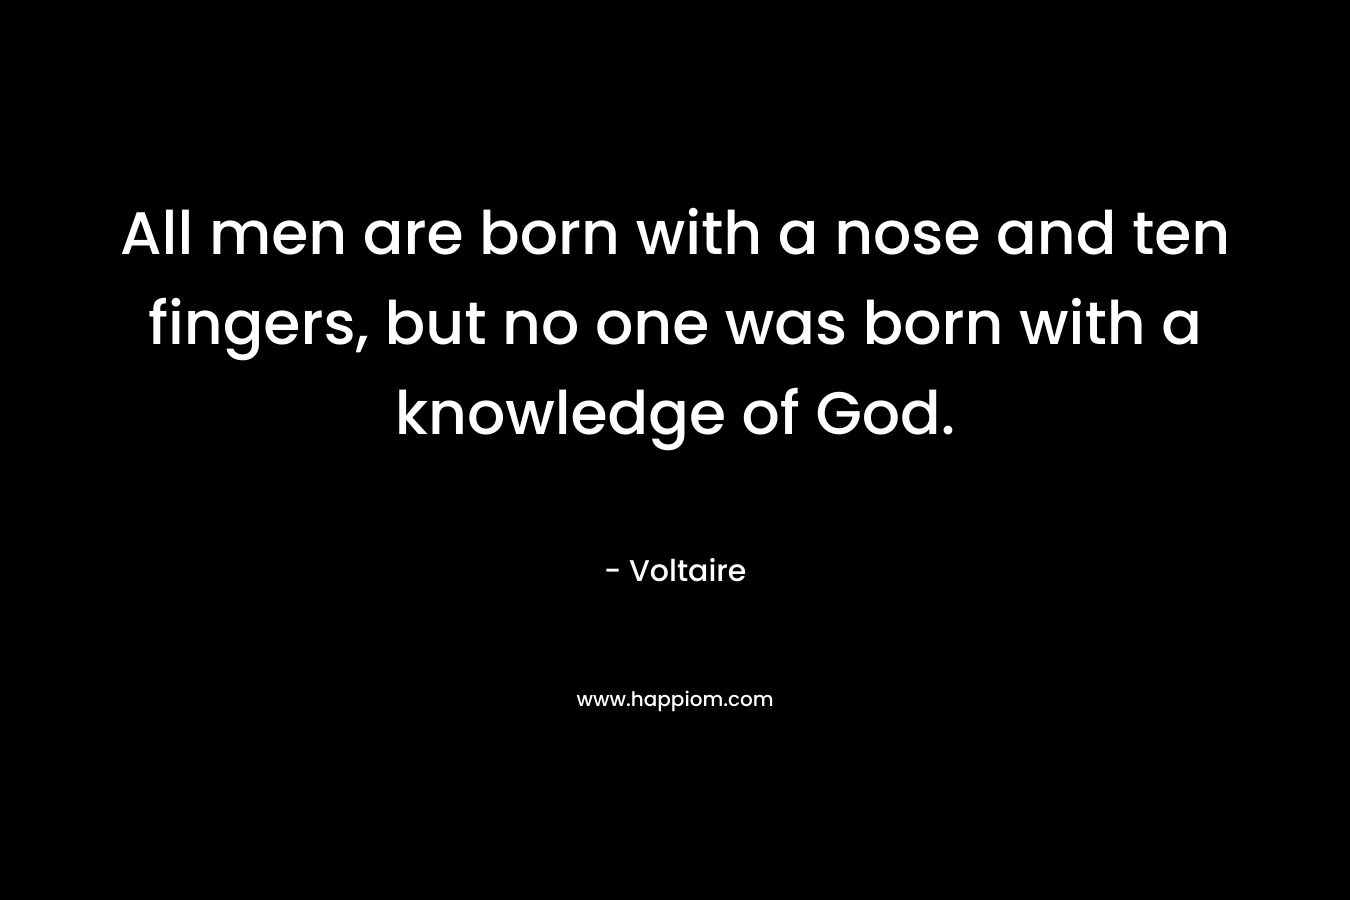 All men are born with a nose and ten fingers, but no one was born with a knowledge of God.